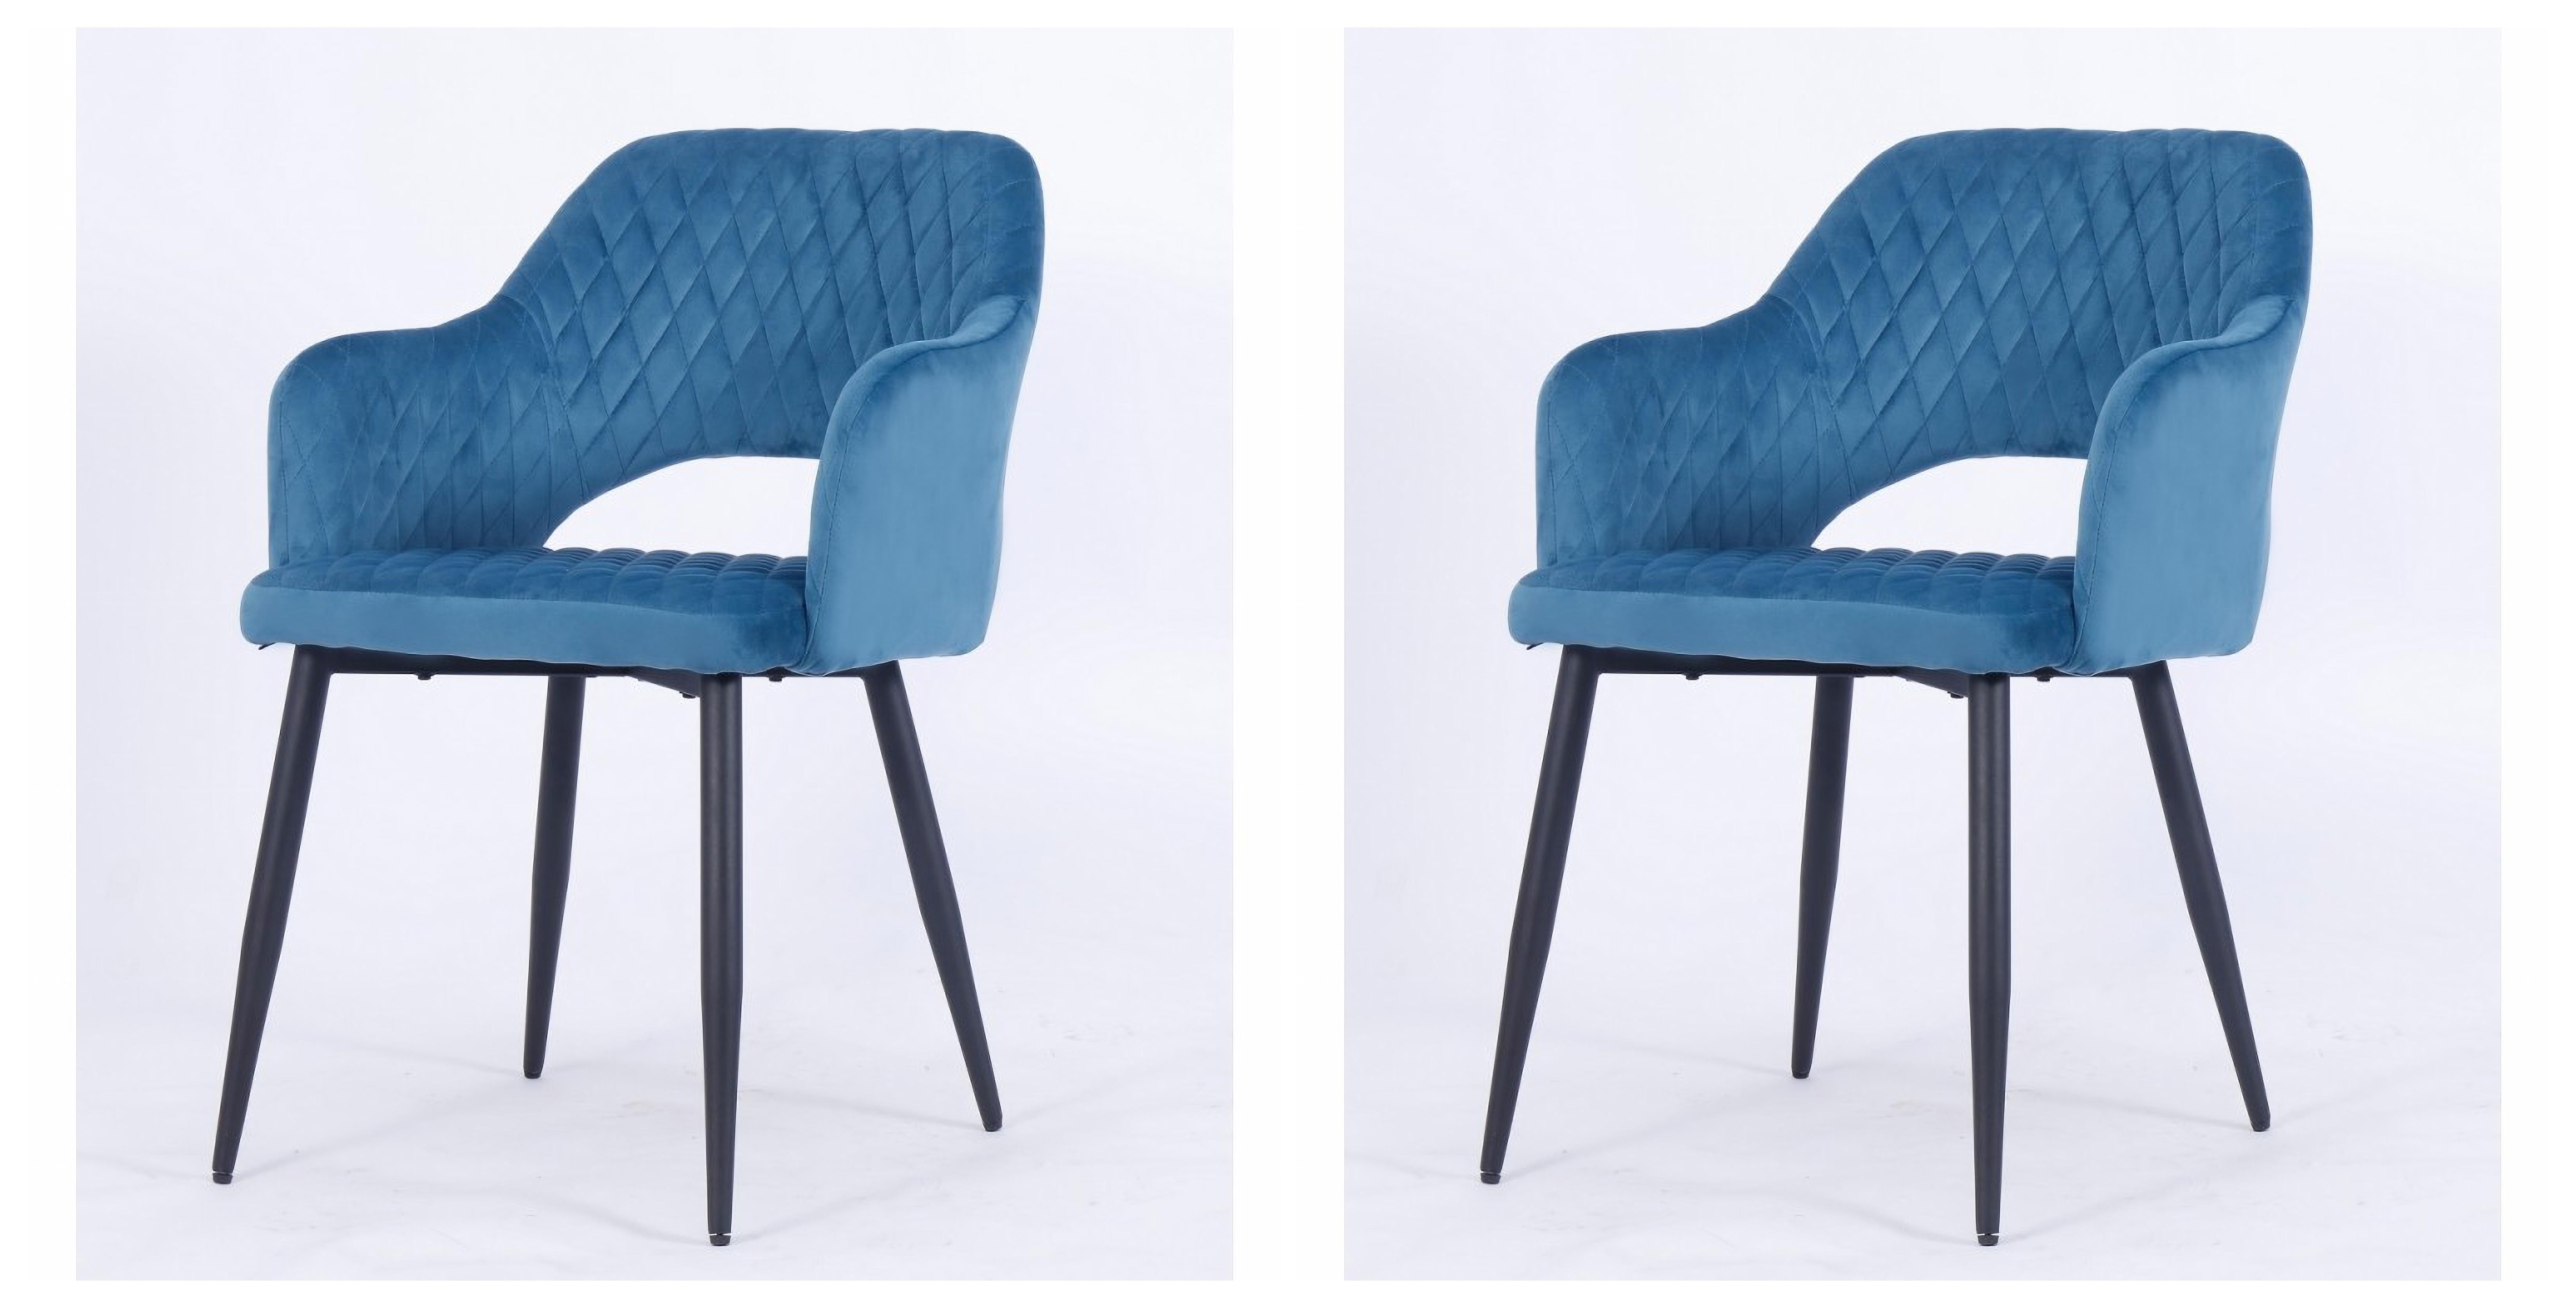 Upholstered dark turquoise armchair new.

DATA SHEET:

-Design armchair, multipurpose.

-Seat and back in wood and foam rubber, upholstered in mink brown velvet 19 fabric

-Tapered metal legs with black epoxy paint finish

-Other colors